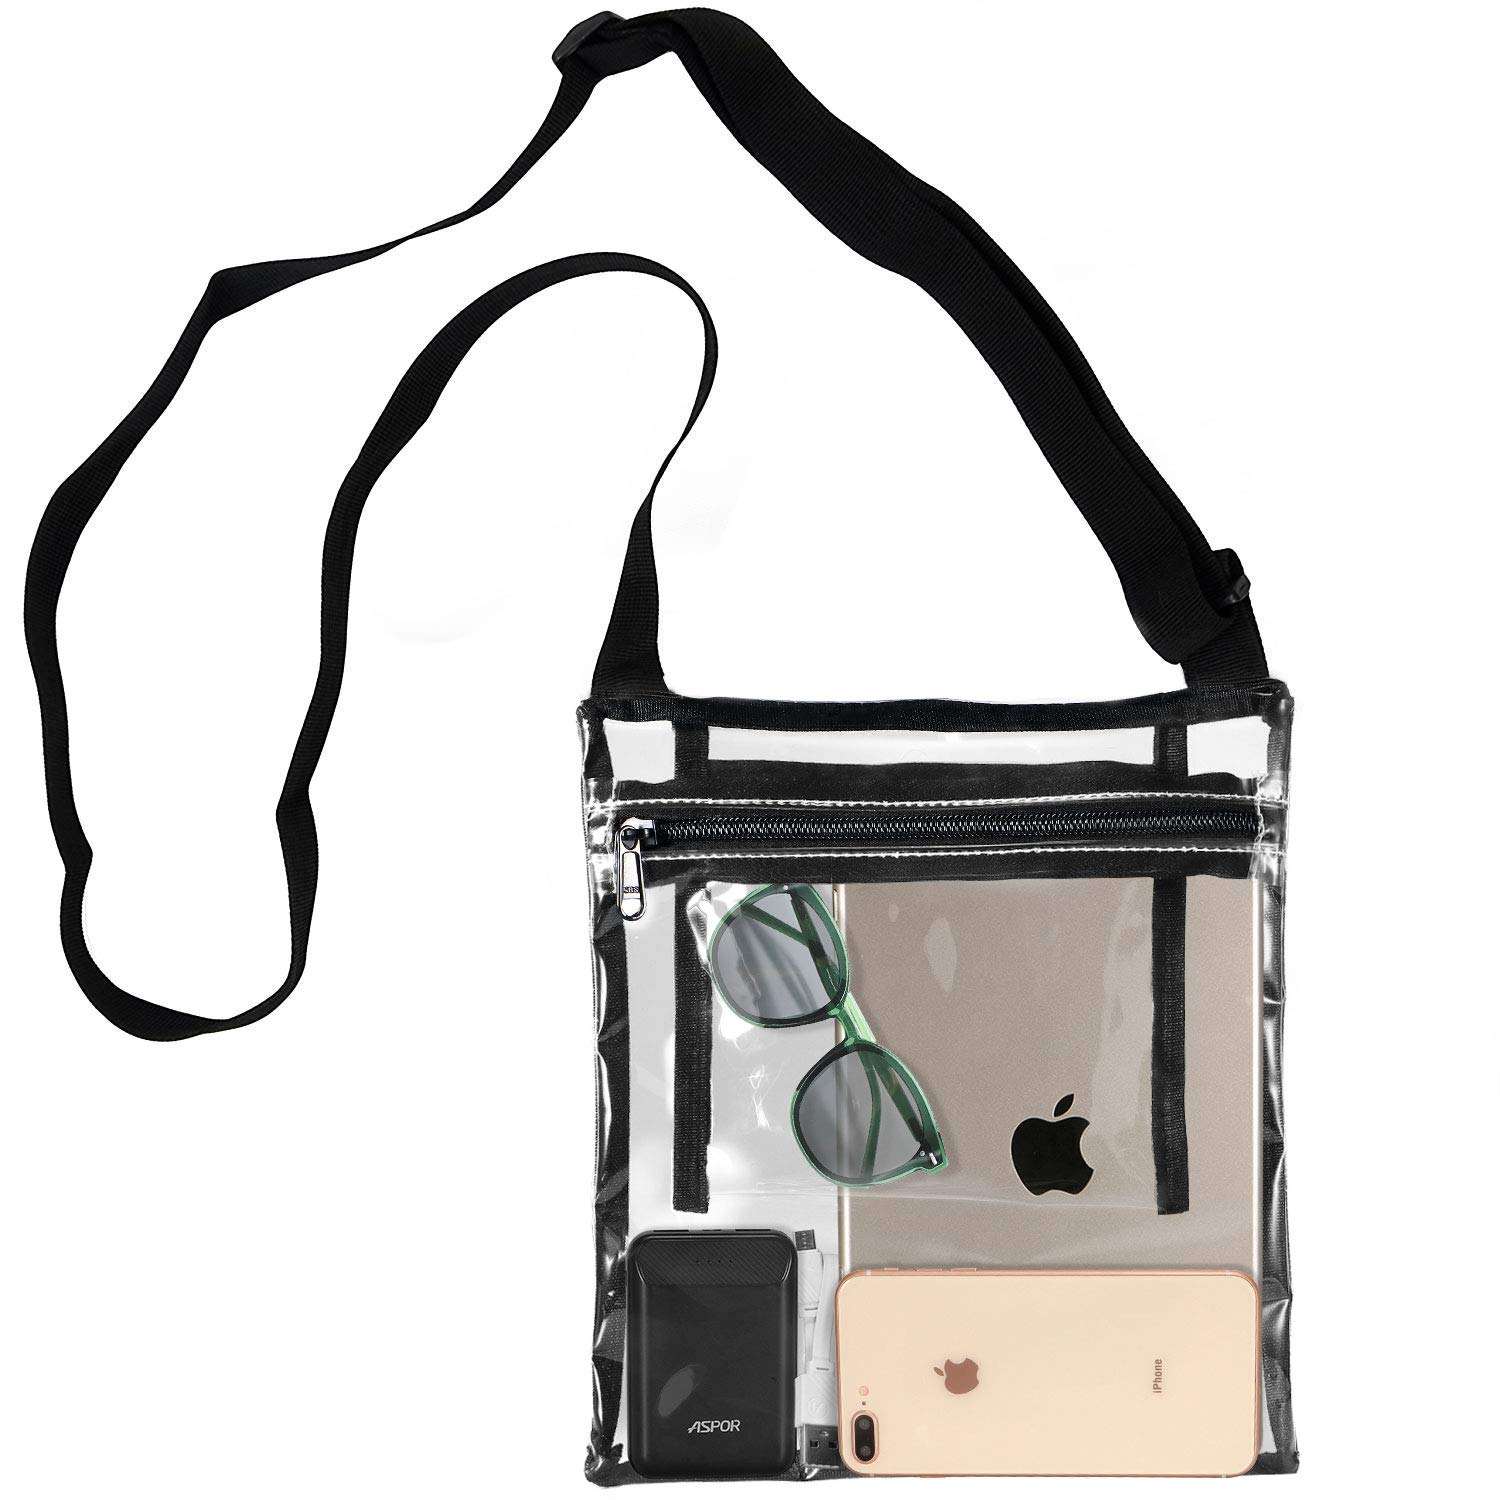 Clear Purse Stadium Approved Crossbody Bag with Inner Pocket